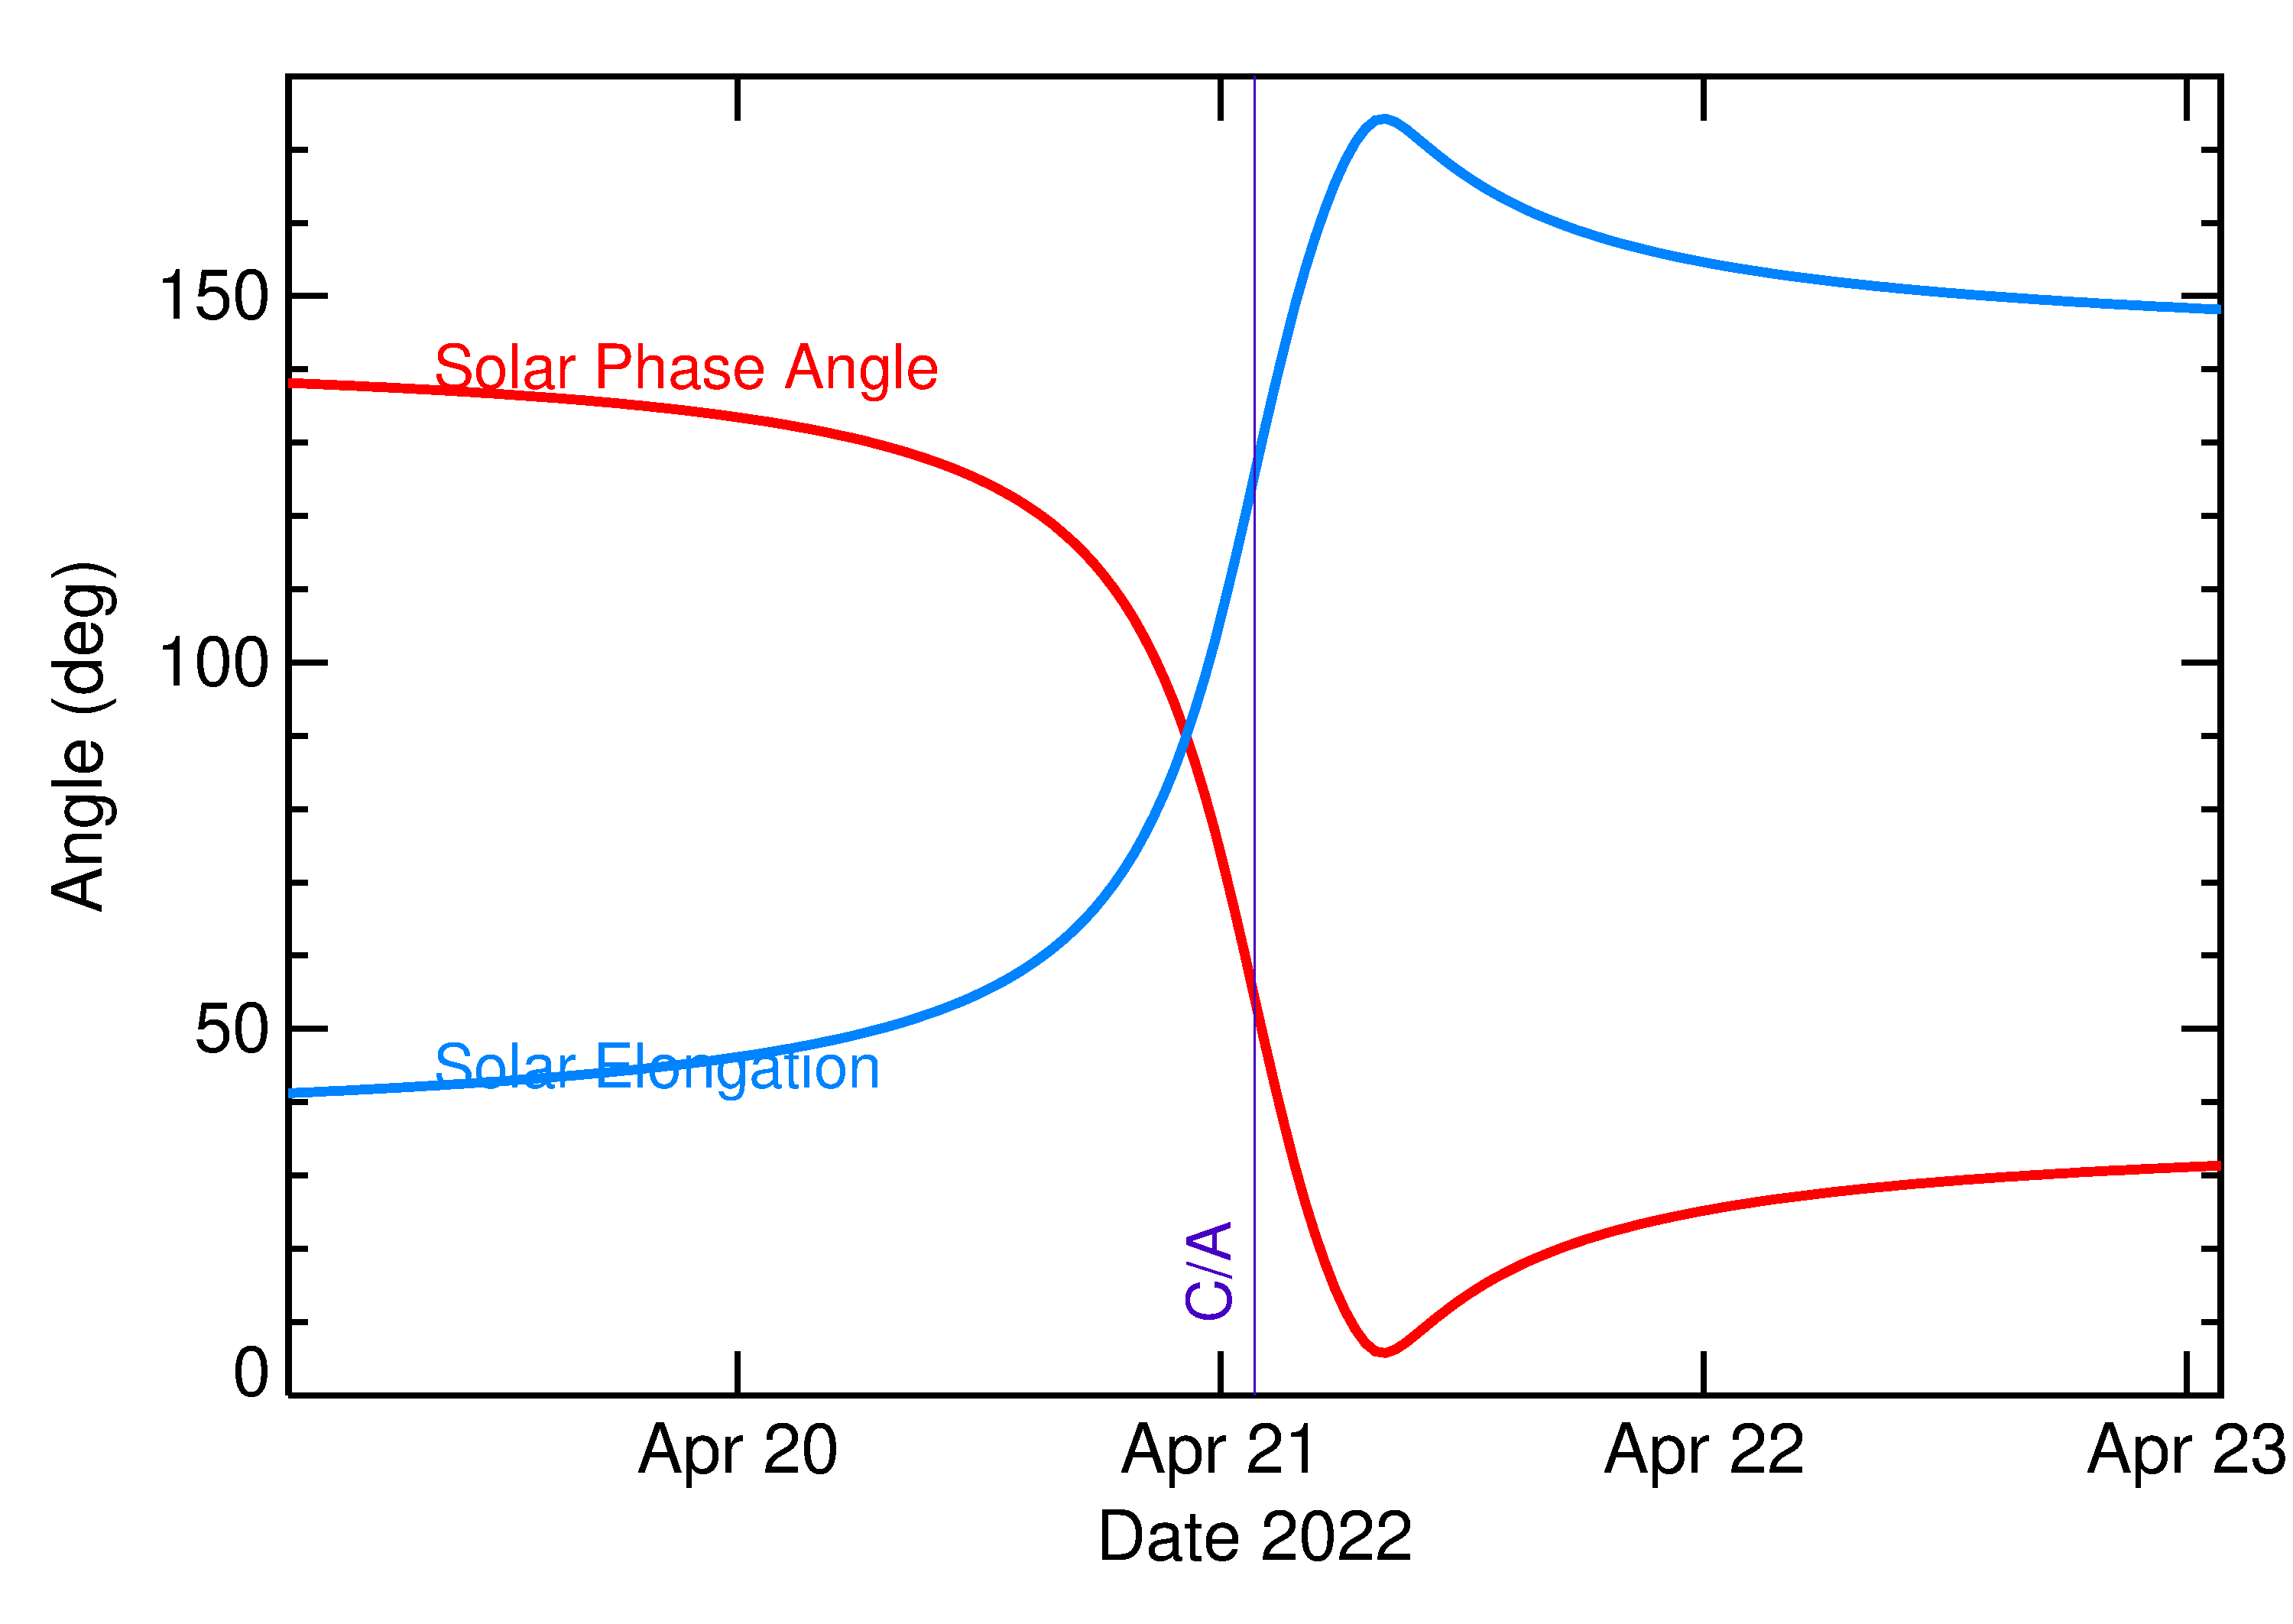 Solar Elongation and Solar Phase Angle of 2022 HM in the days around closest approach